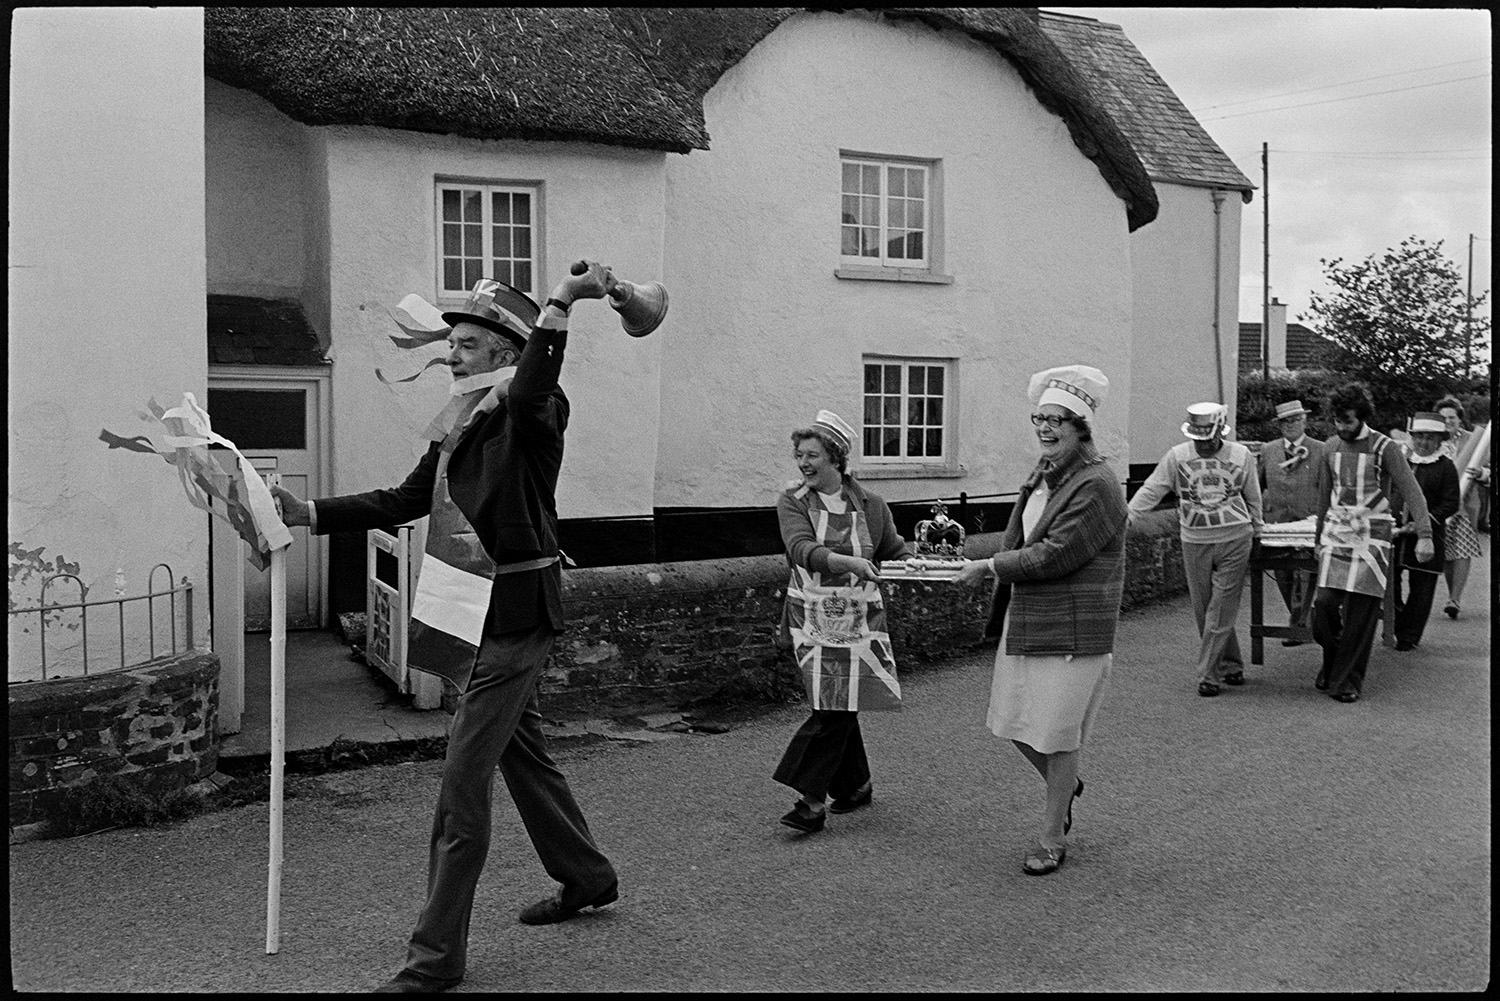 Procession for giant Jubilee cake, village square. Man listening to radio. 
[Men and women parading a giant cake through a street in Dolton to celebrate the Silver Jubilee of Queen Elizabeth II. A man leading the procession, possibly a town crier, is ringing a bell. They are passing a thatched cottage and are wearing aprons with Union Jack designs.]